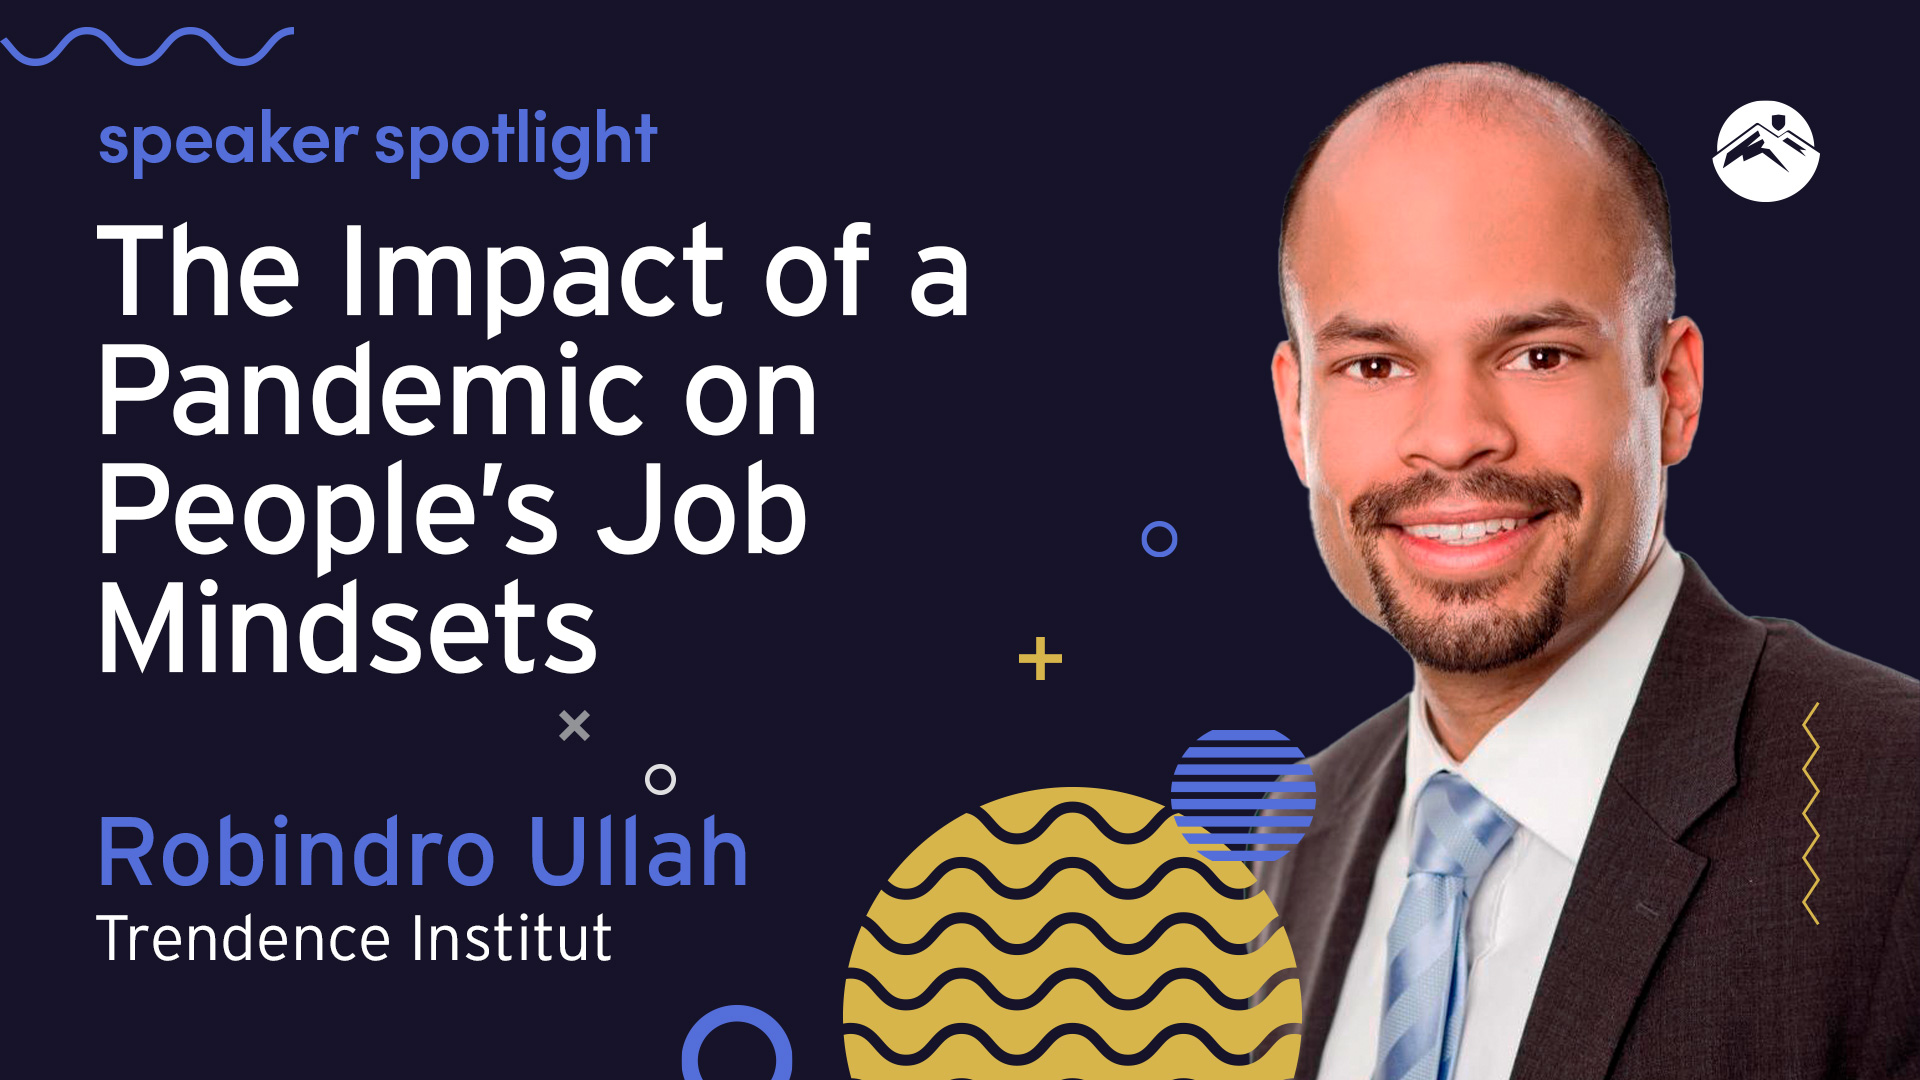 CSLS Speaker Spotlight: Robindro Ullah on the Impact of a Global Pandemic on People's Job Mindsets